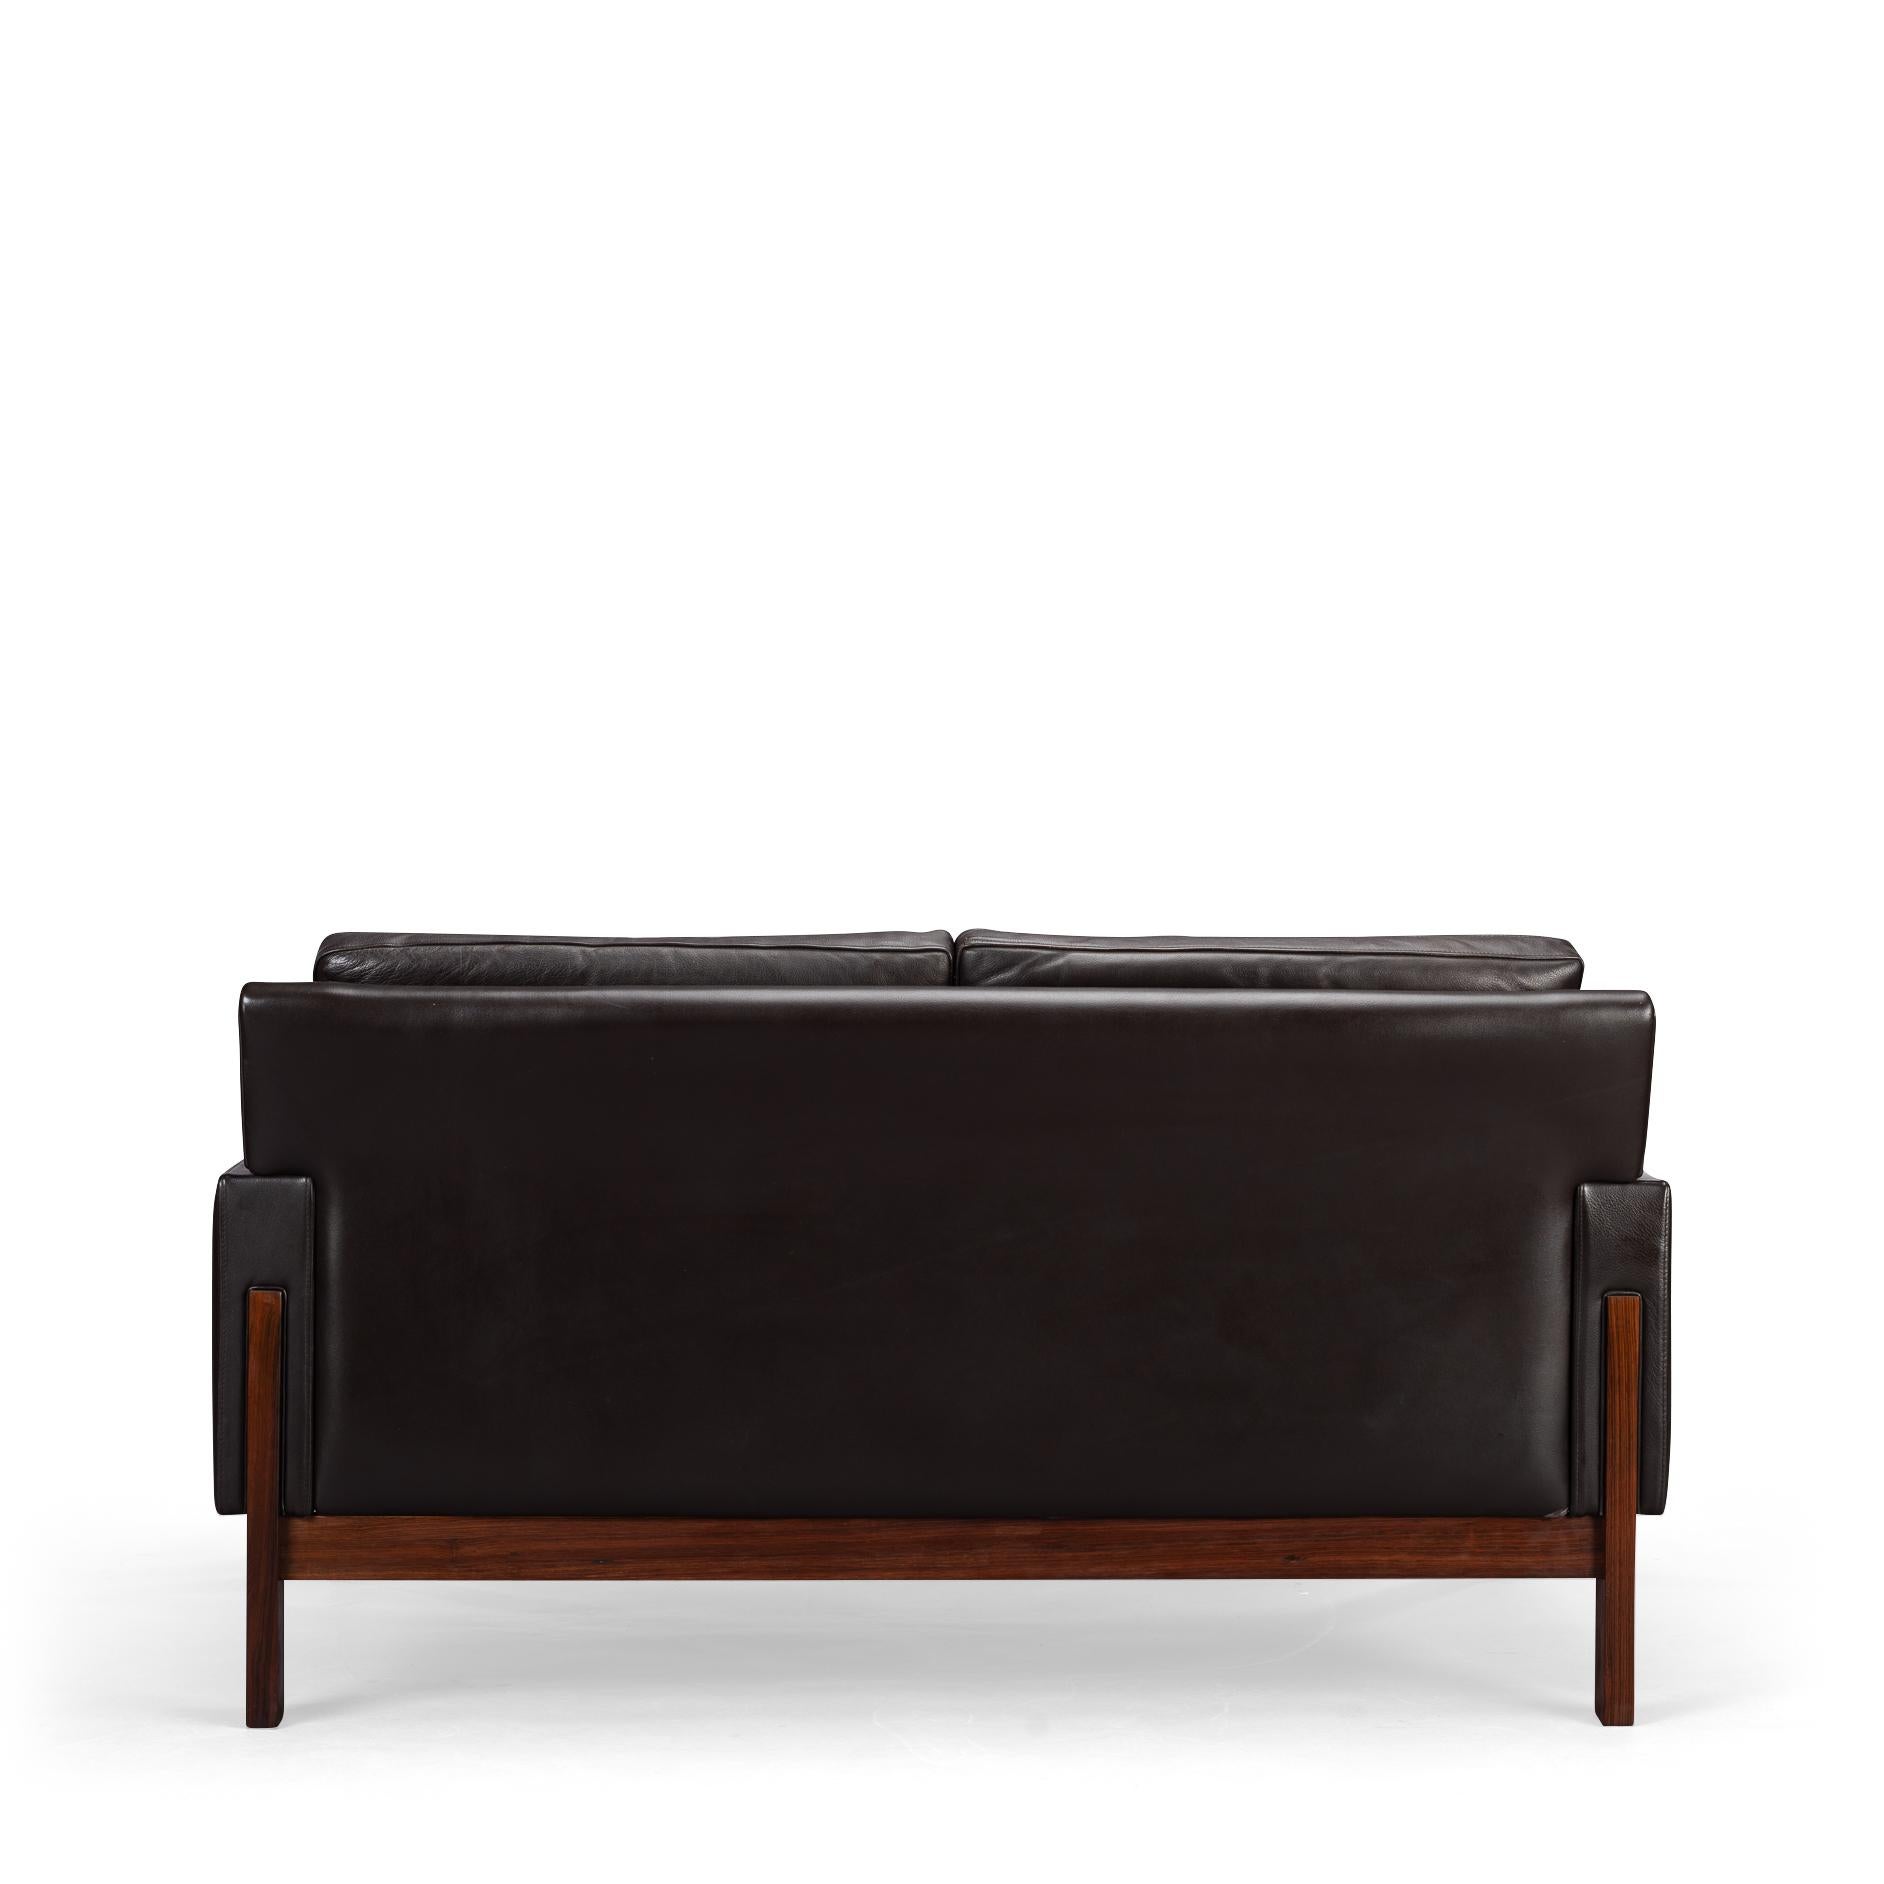 Black as night, faster than a shadow but also remarkably comfy folks! This mid century Danish sofa by Dux with base and legs in a deep dark rosewood has a lot going for it. Pure craftsmanship and durability to start with that are showcased by a